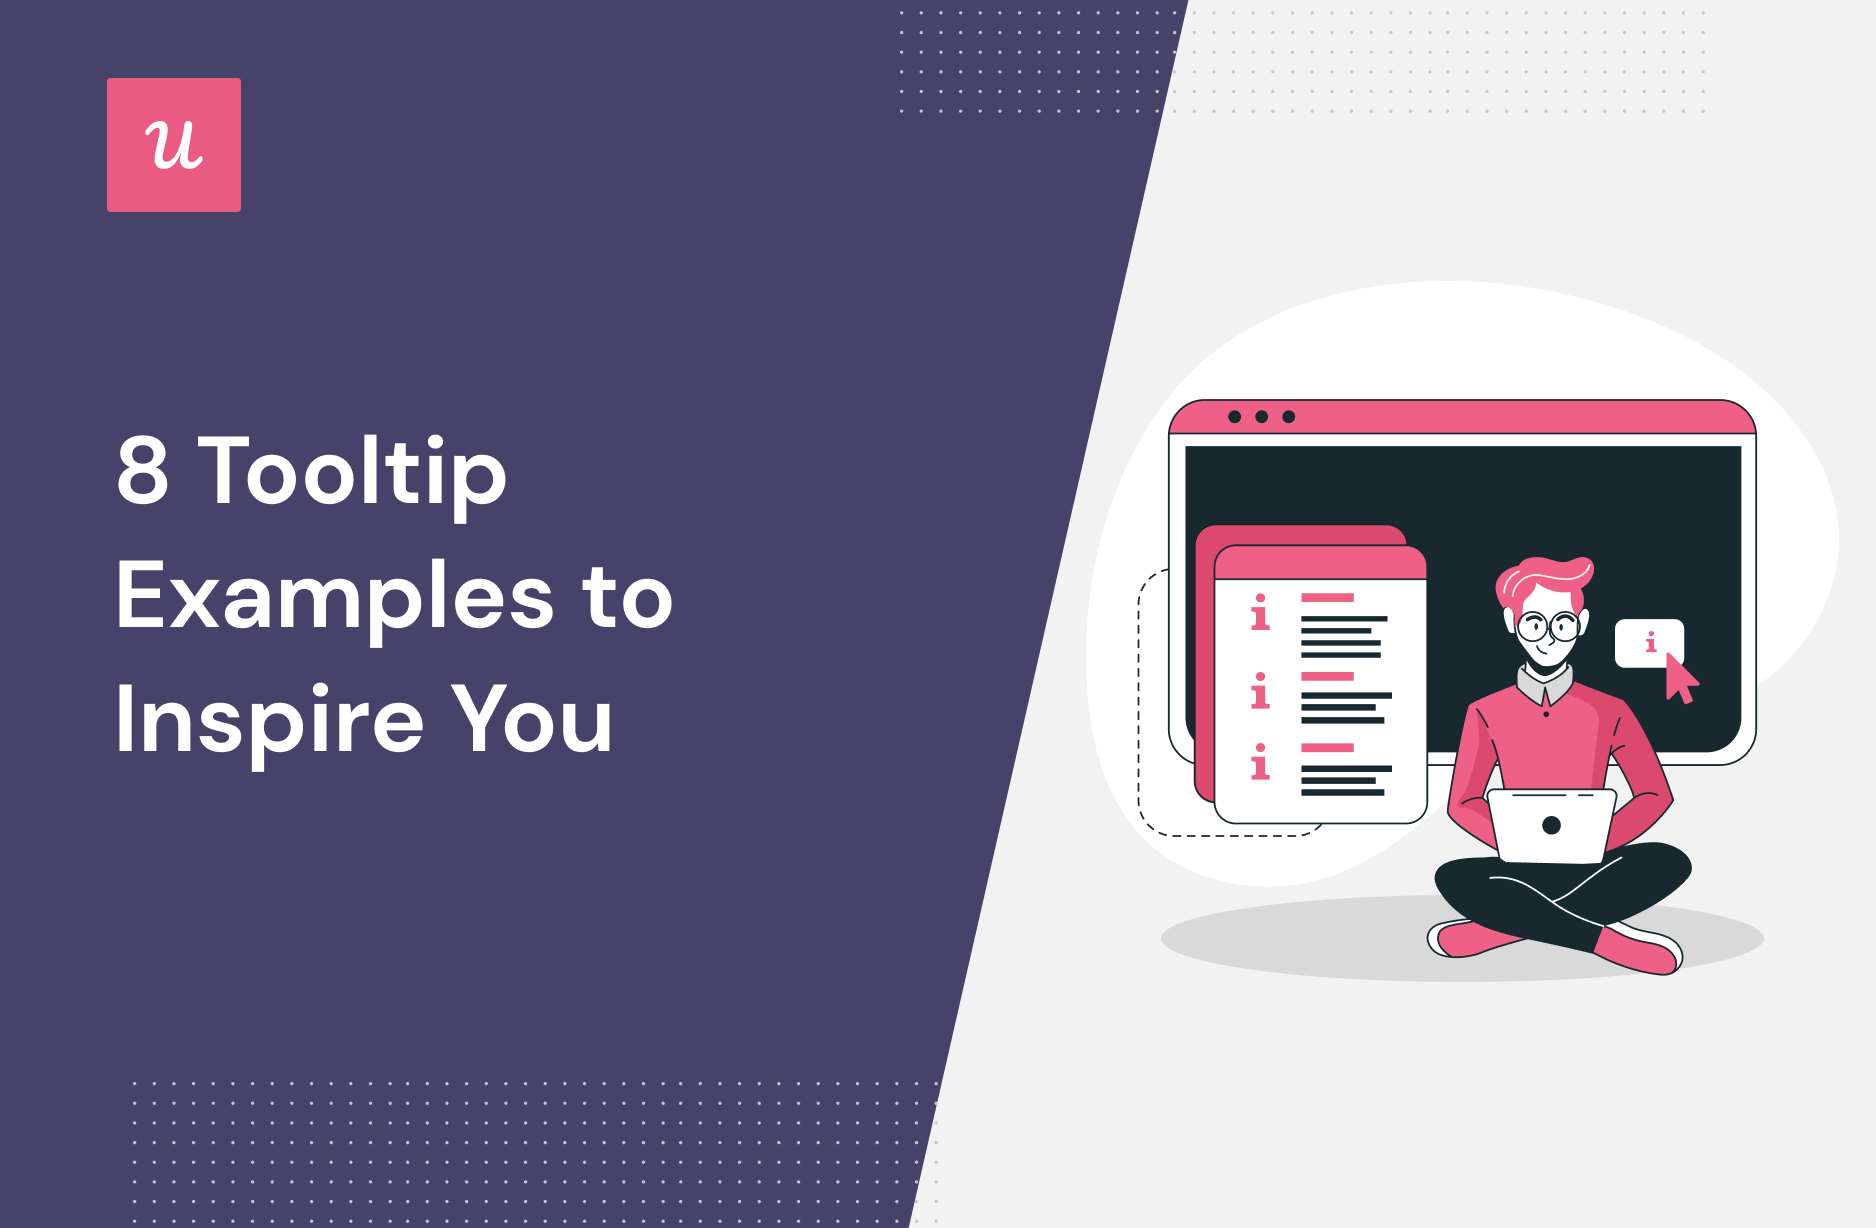 8 Tooltip Examples to Inspire You